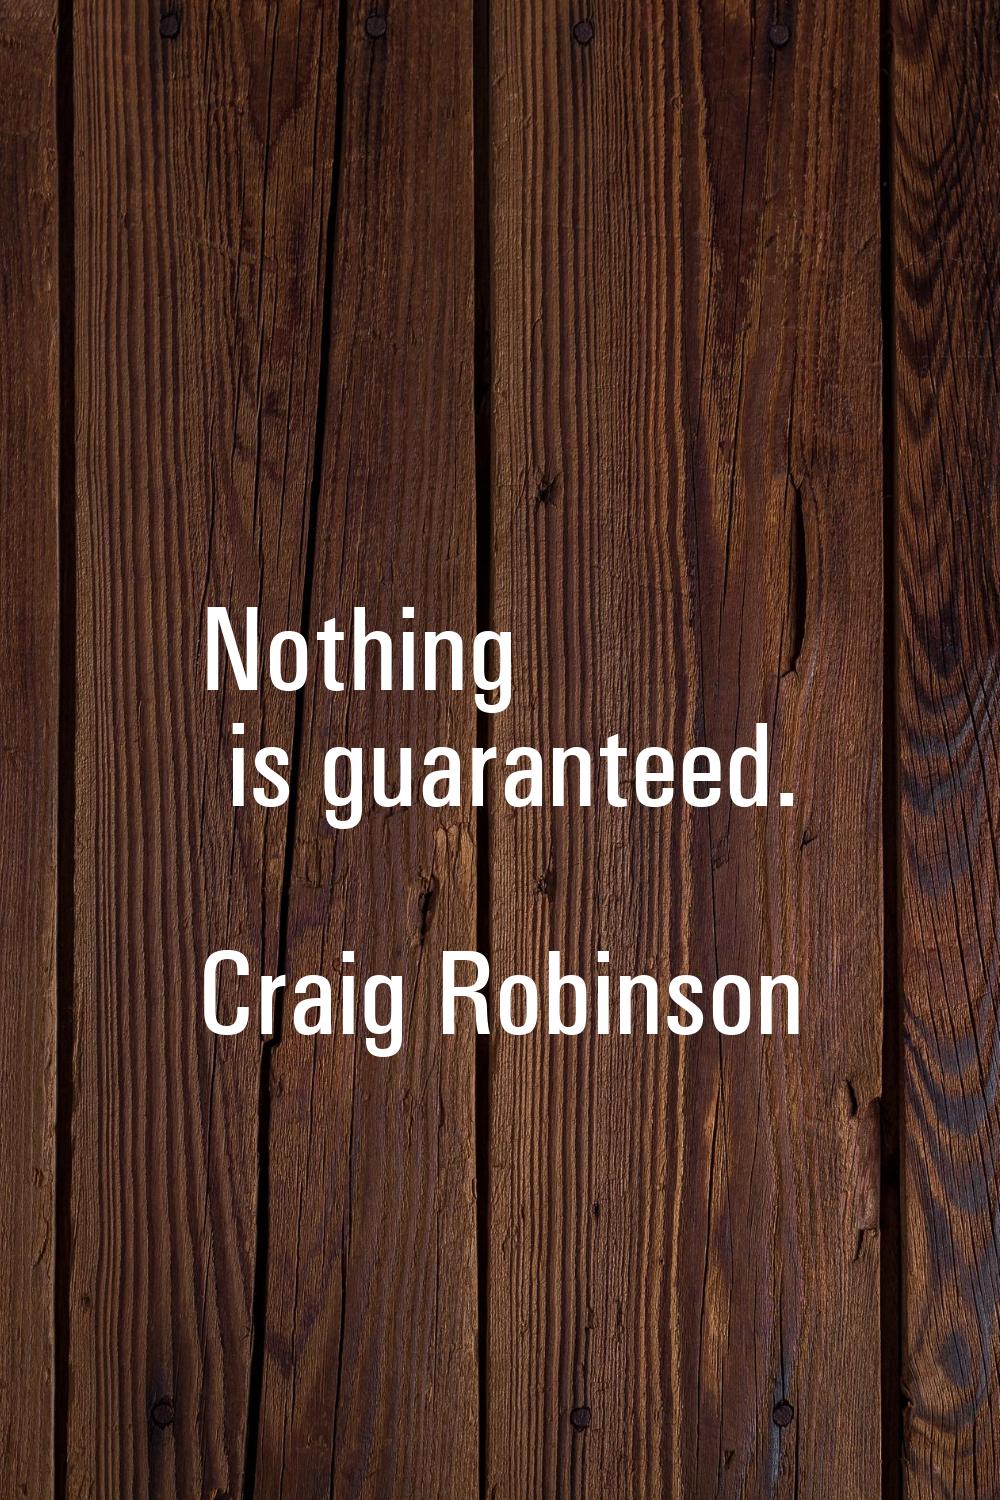 Nothing is guaranteed.